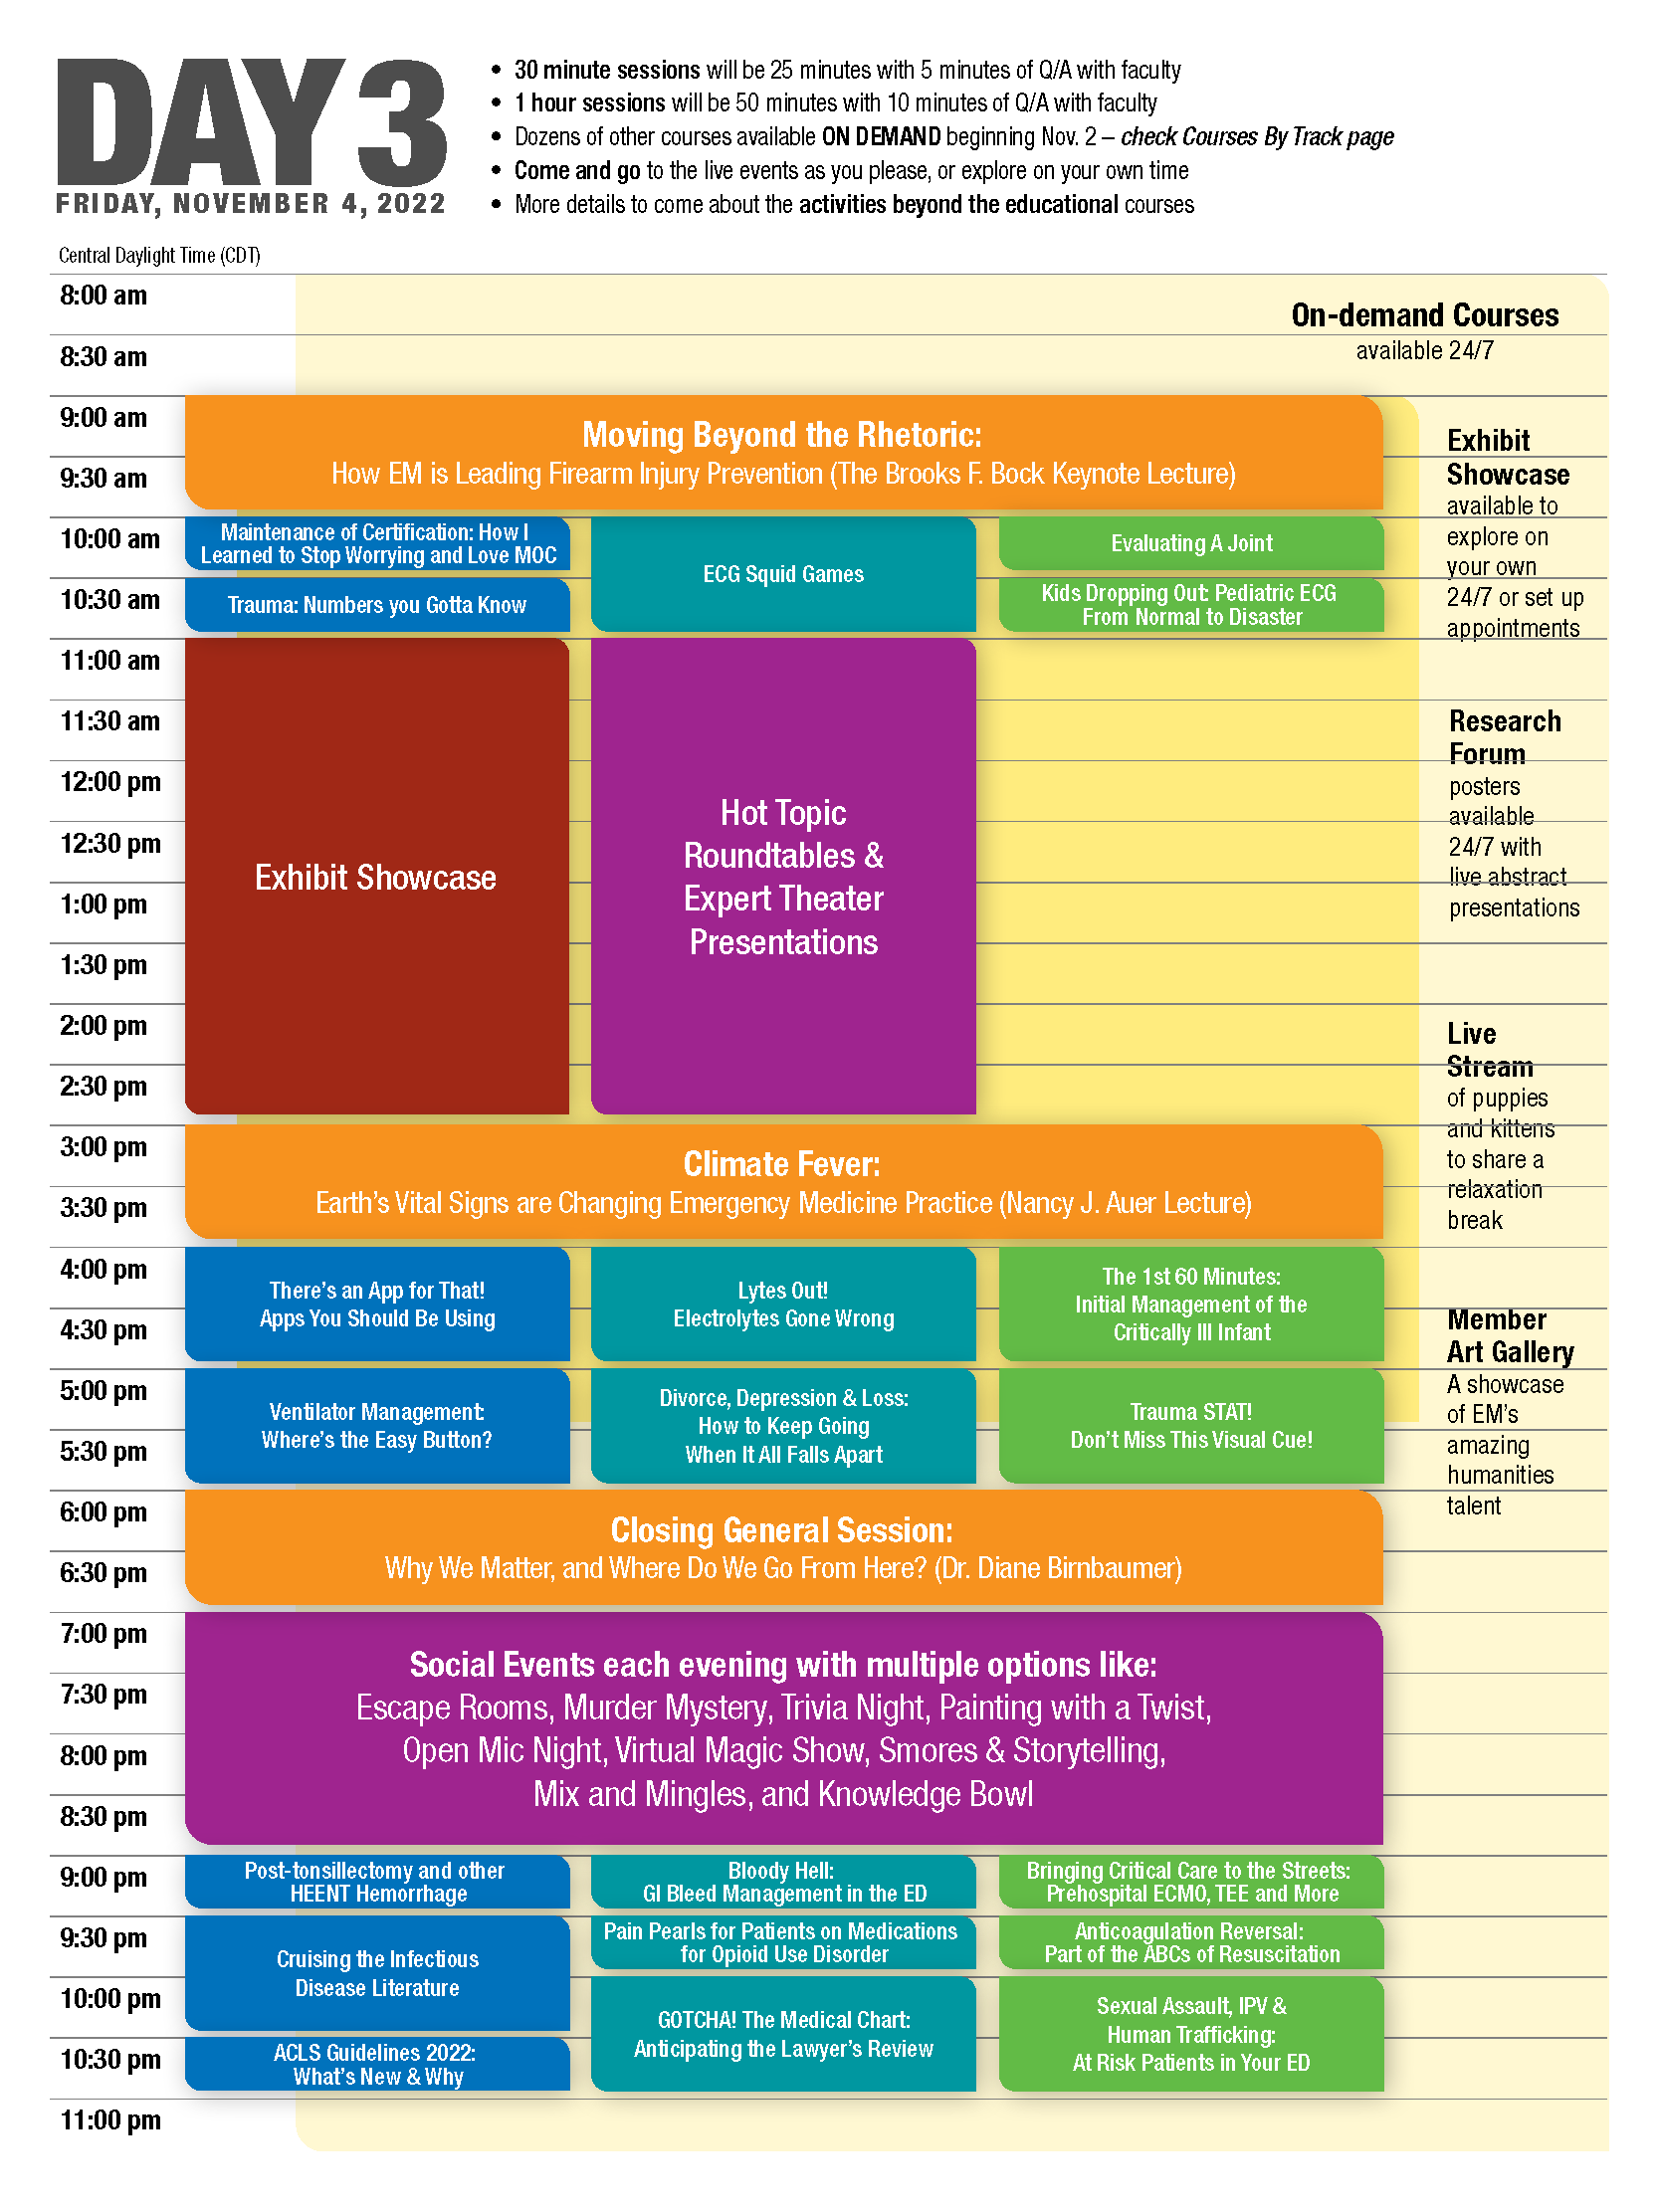 ACEP22-UnconventionalSchedules-Day3.png